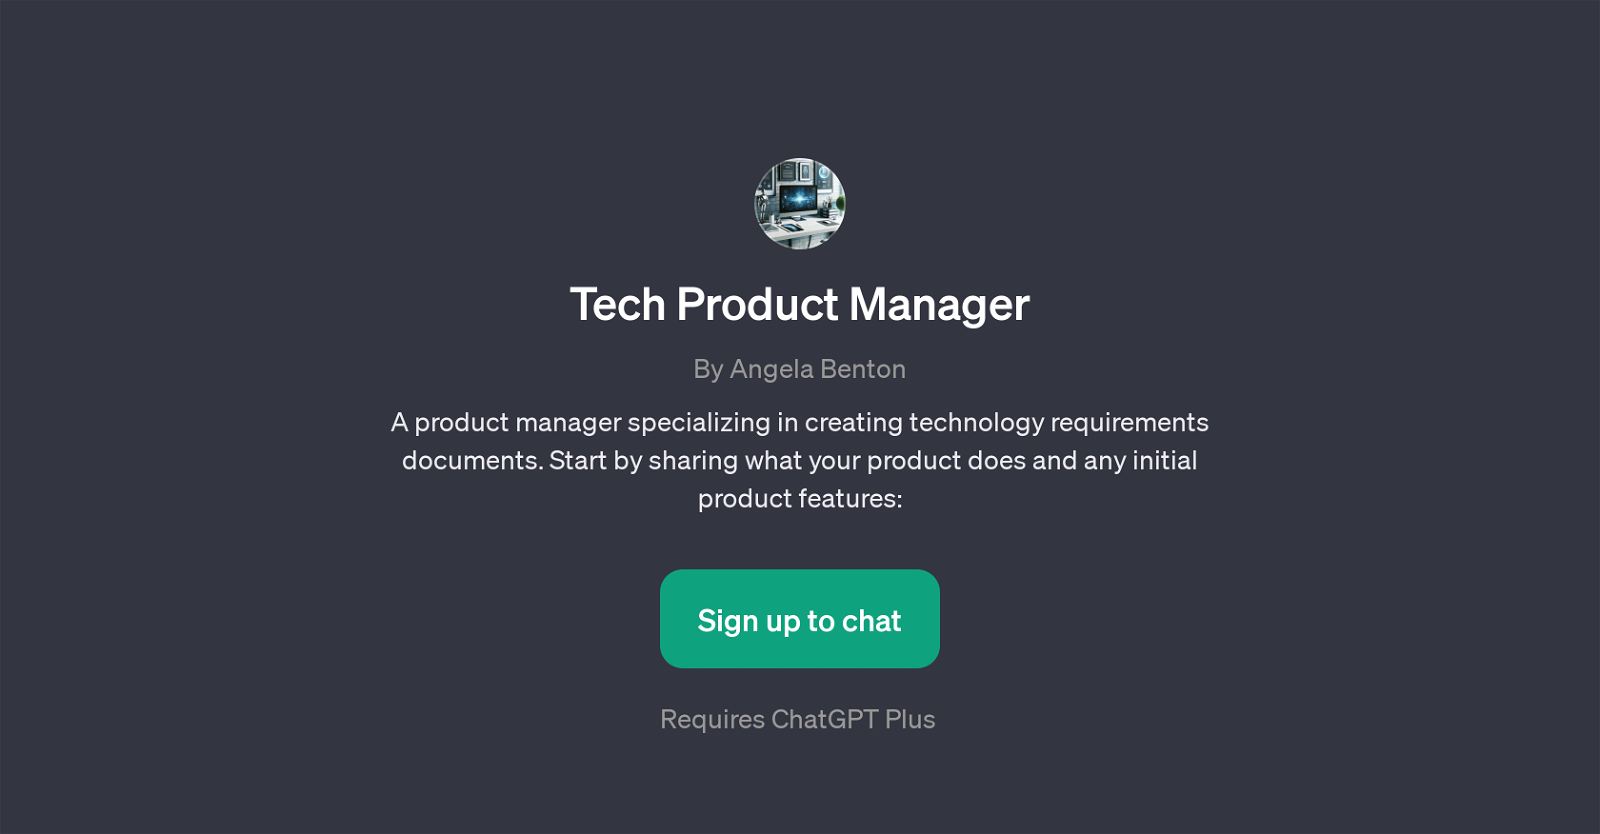 Tech Product Manager website